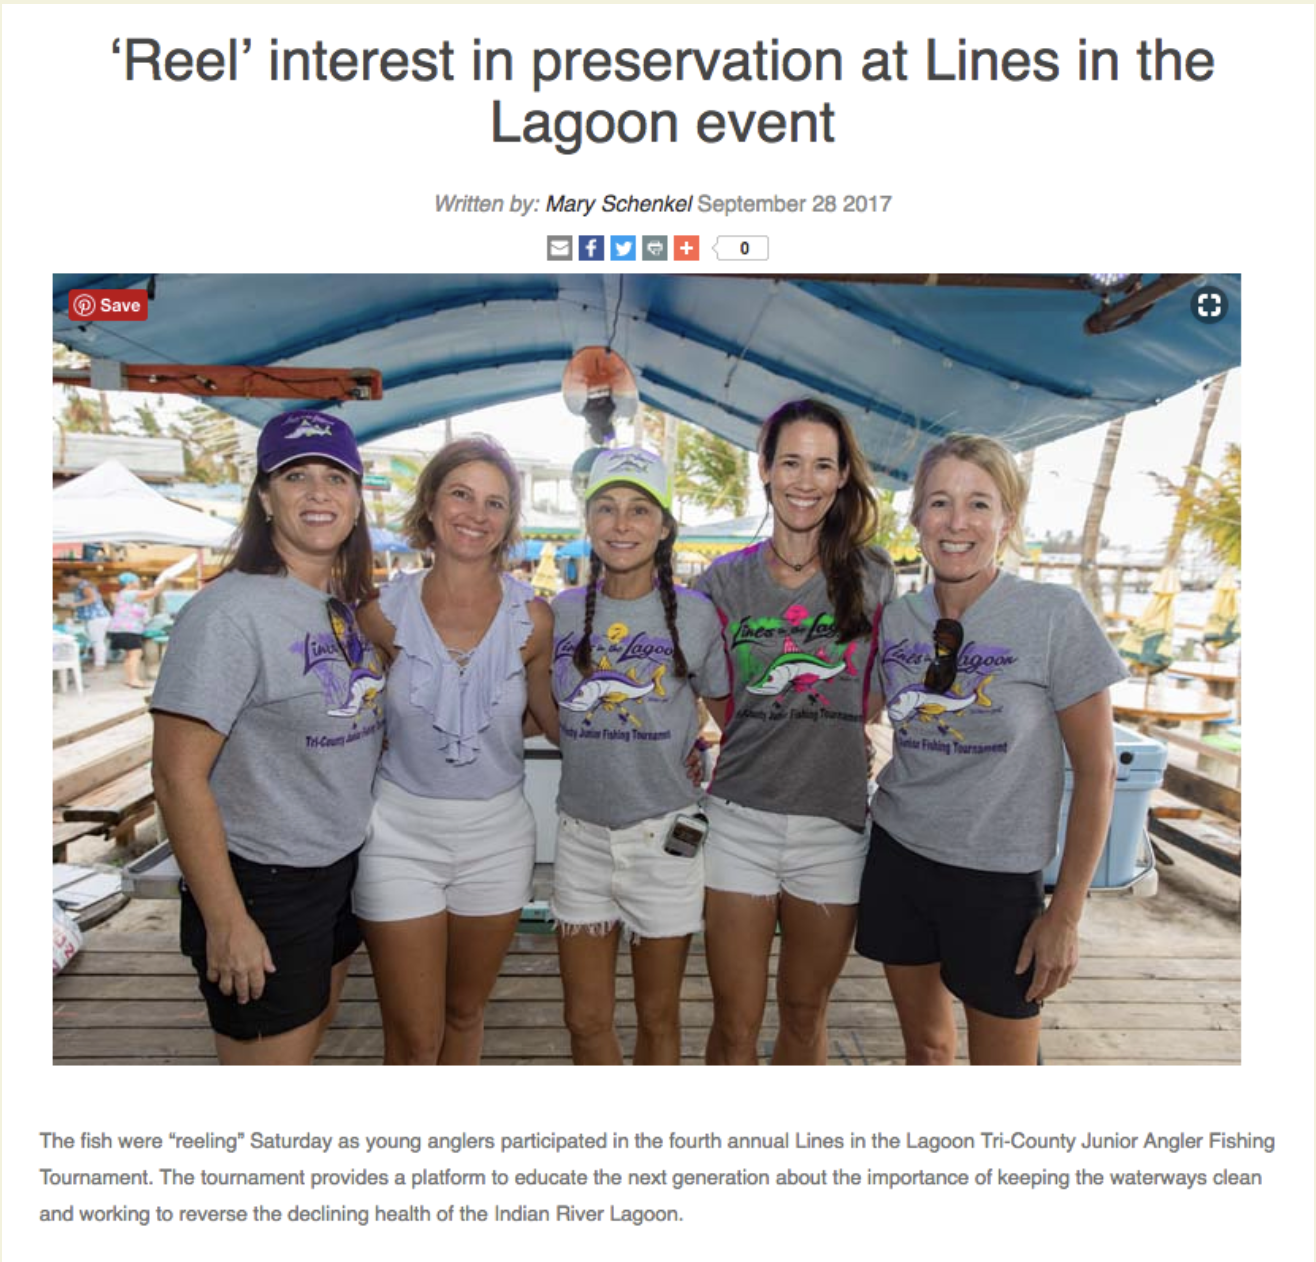 Interest in Preservation at Lines in the Lagoon